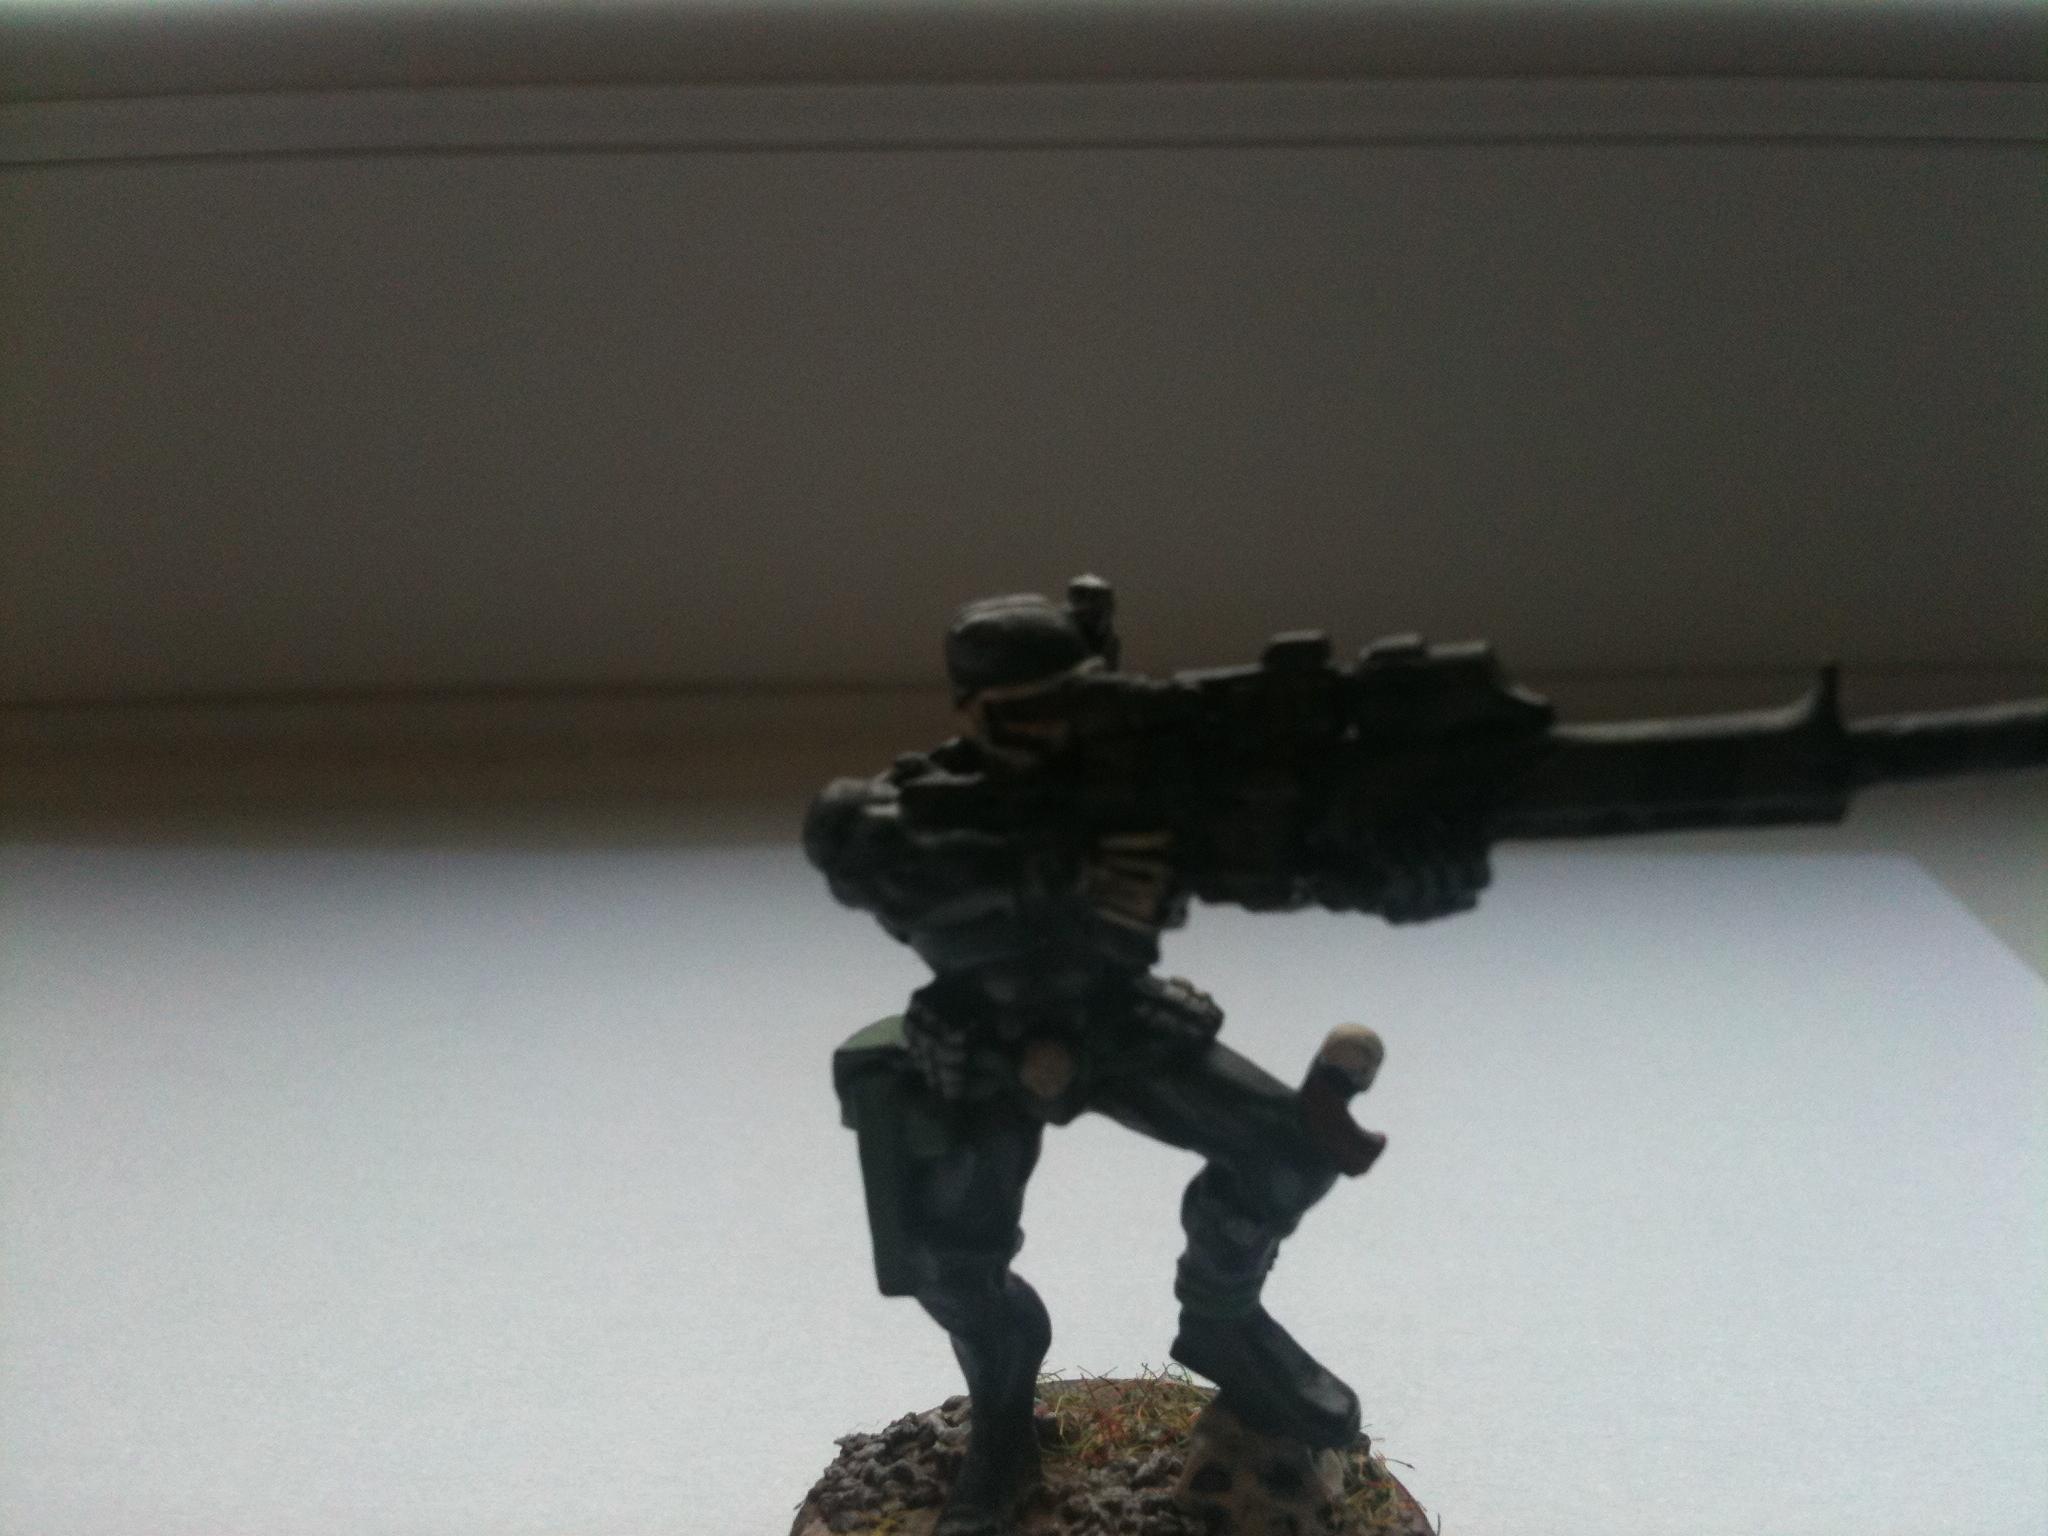 Assassin, Vindicare, My Vindicare assassin, picture might not be that good but im very pleased with the outcome